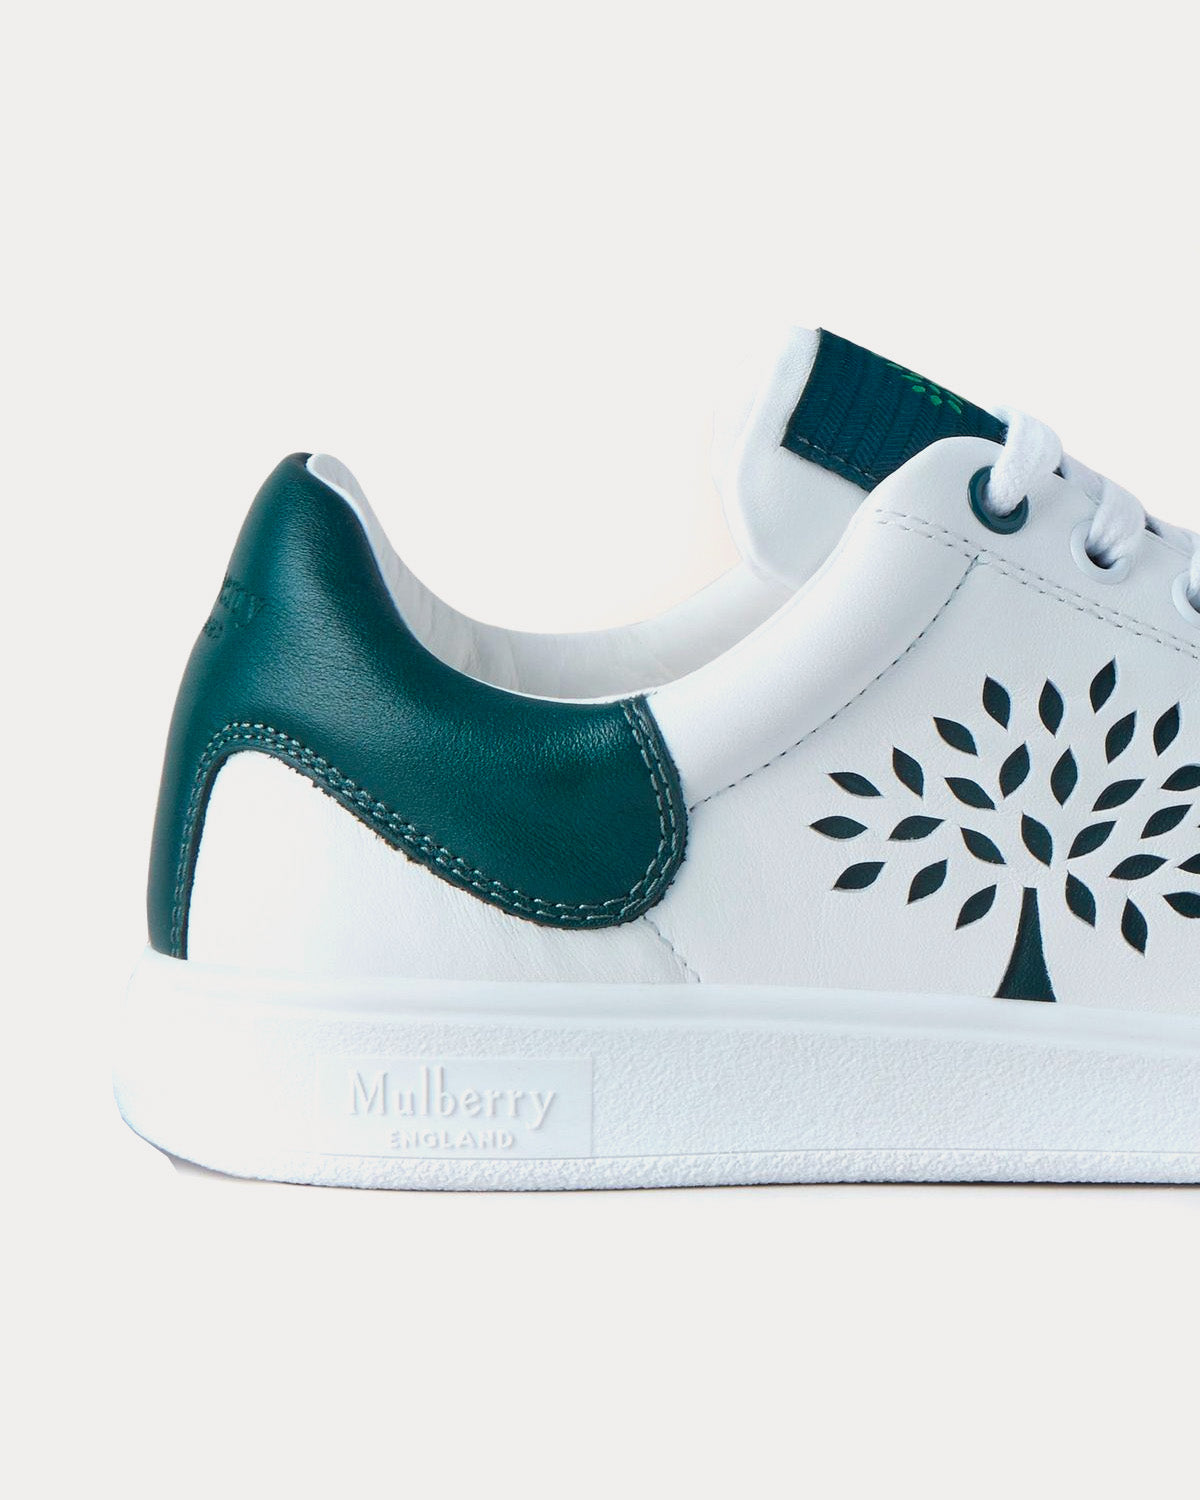 Mulberry - Tree Tennis Bovine Leather Military Green Low Top Sneakers